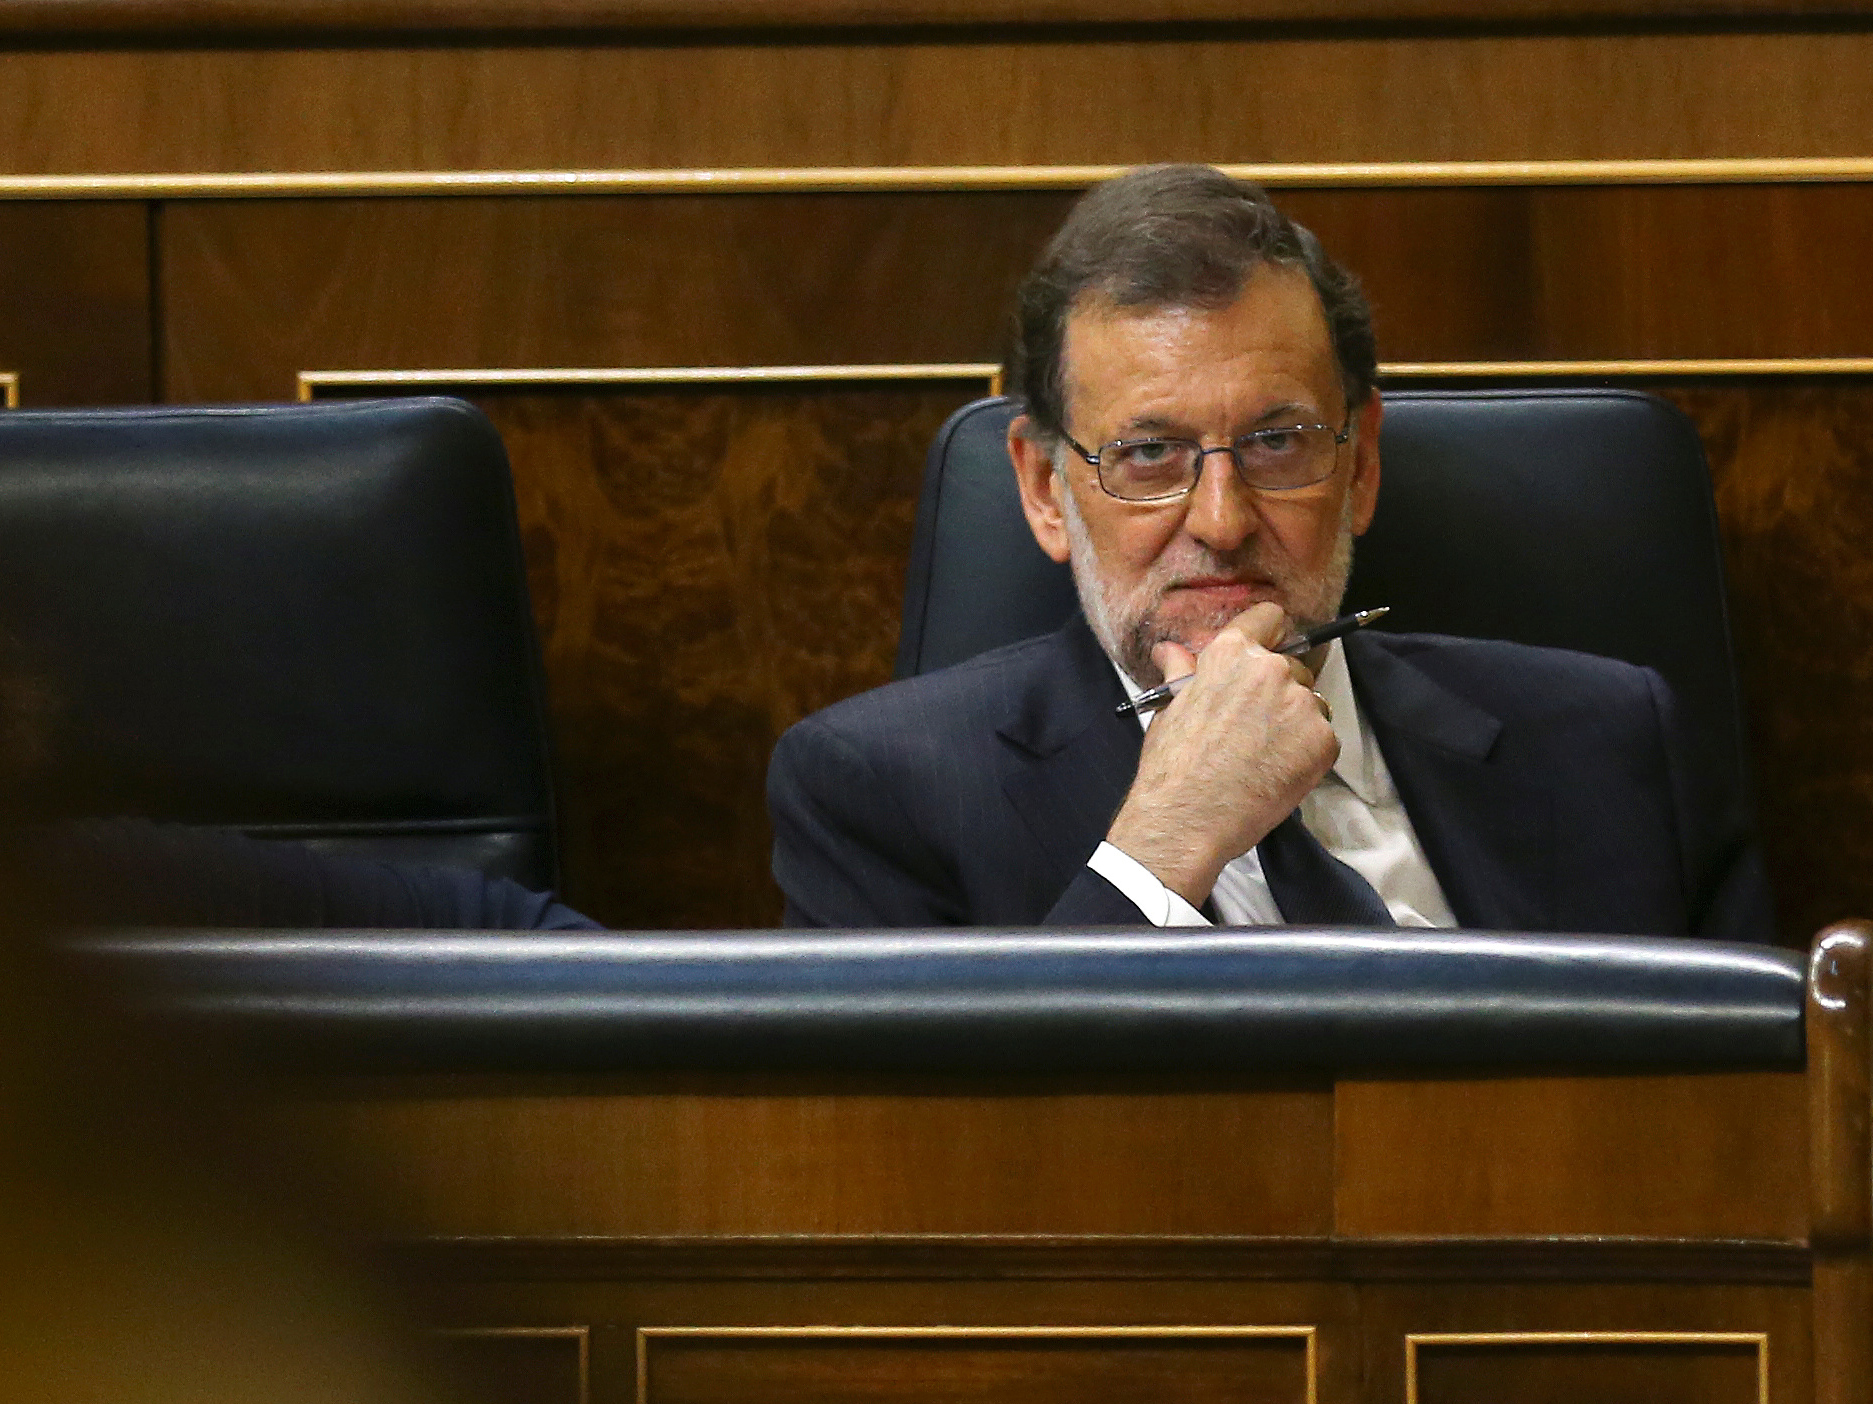 Spain’s acting PM Rajoy attends the investiture debate at the Parliament in Madrid